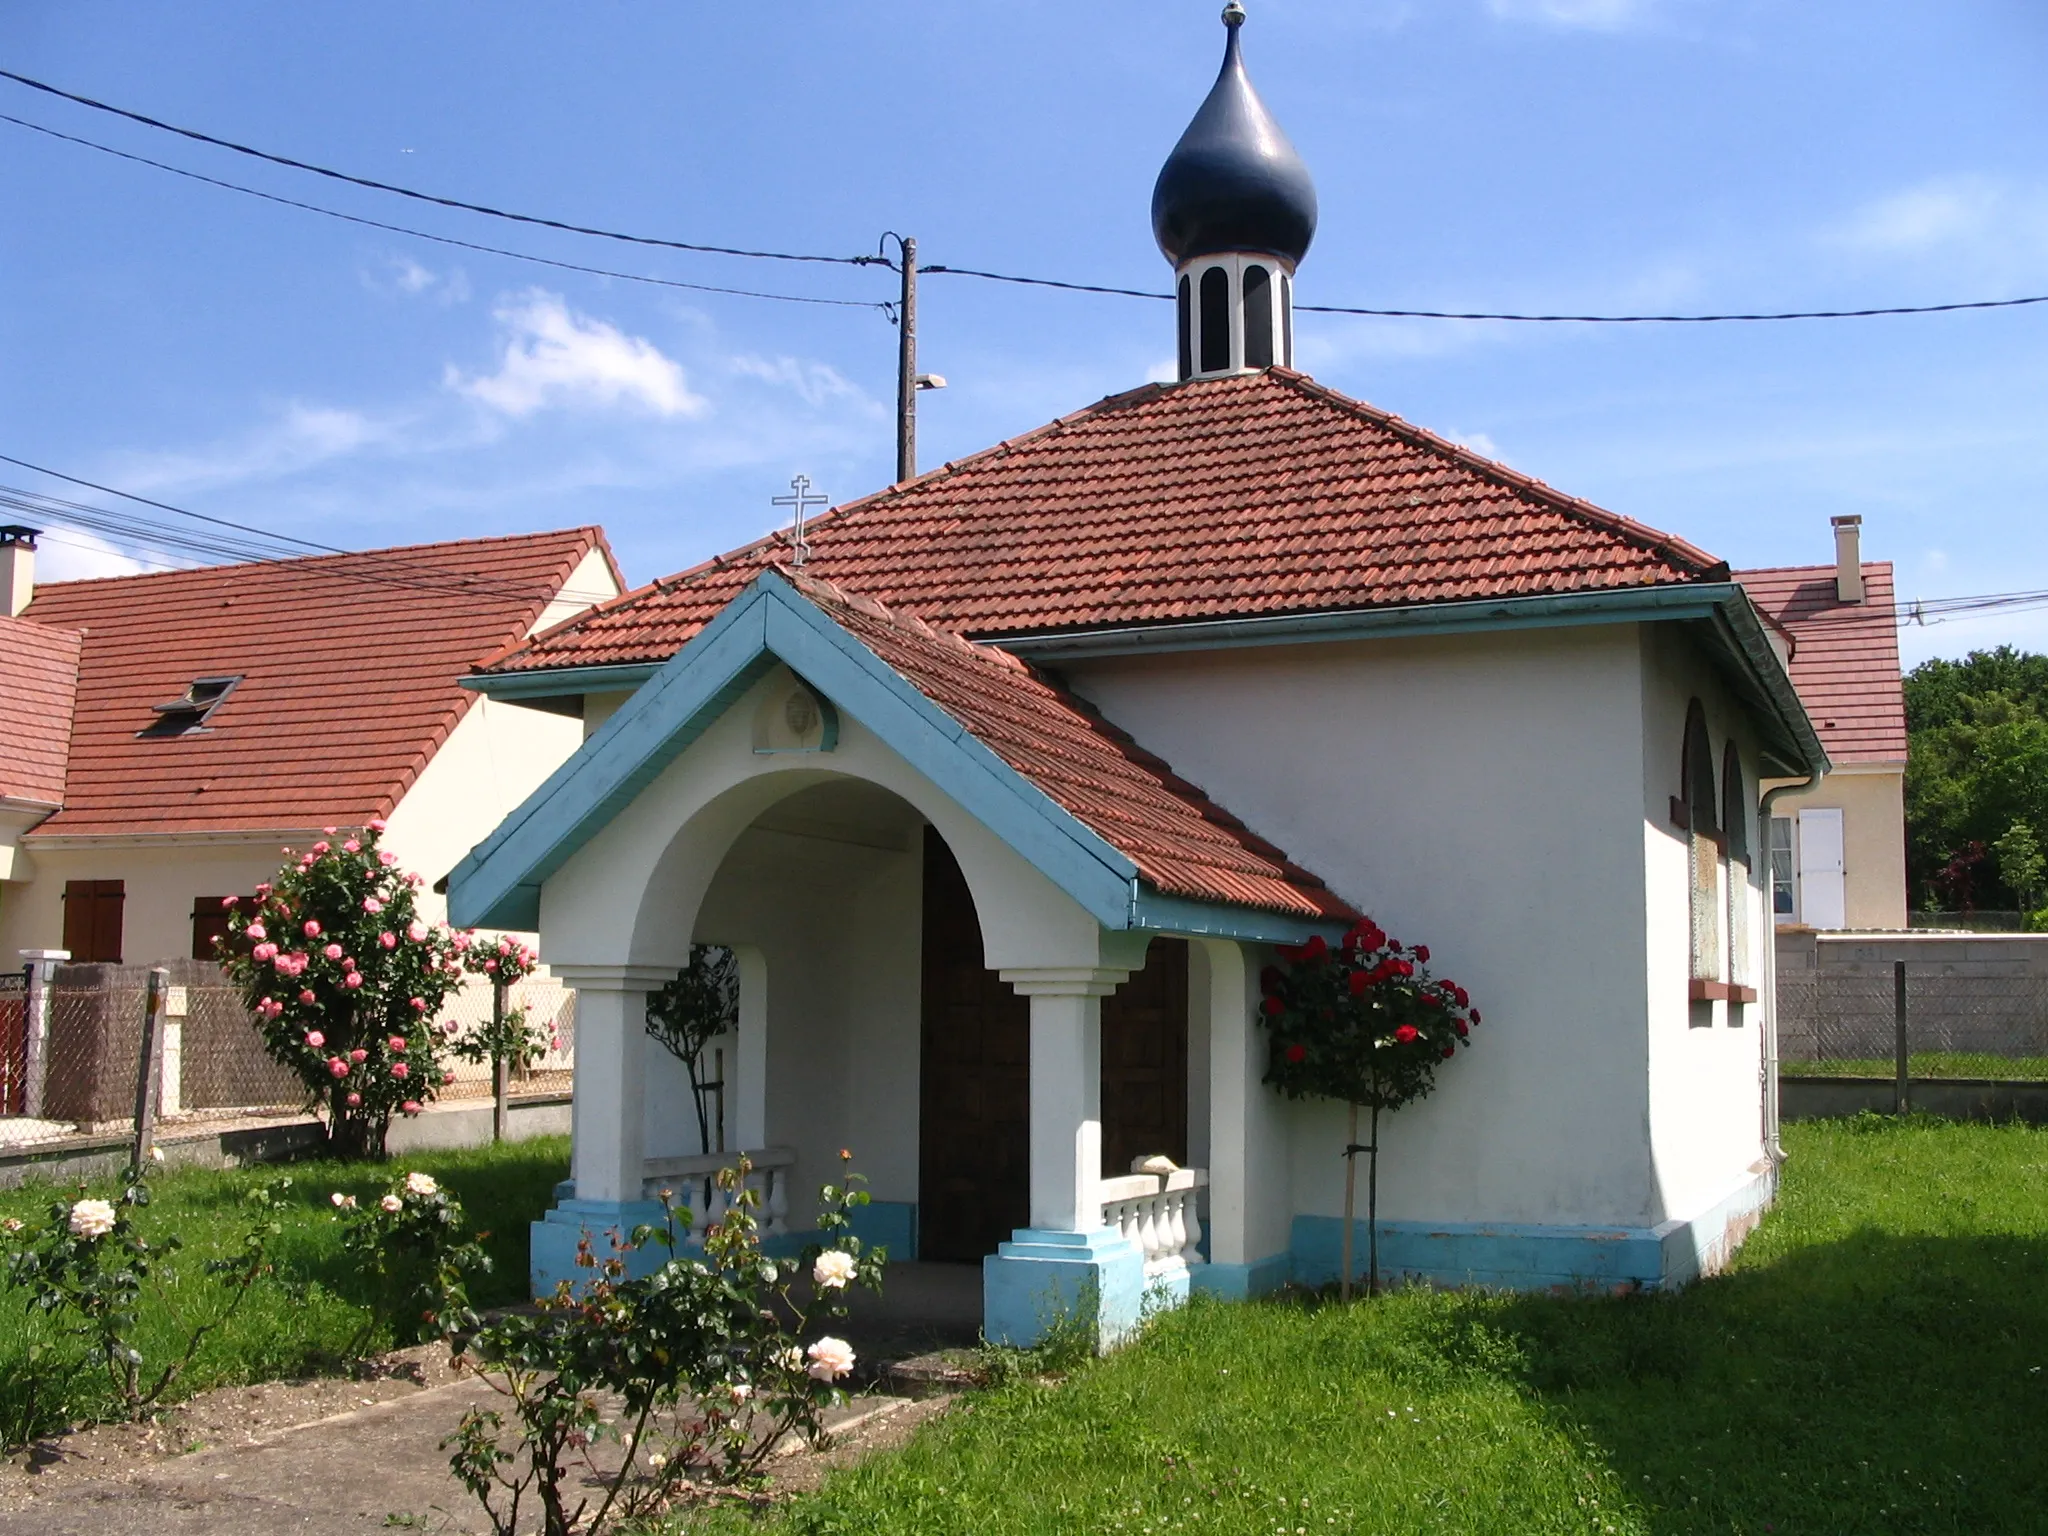 Photo showing: The Russian orthodox chapel of Champagne-sur-Seine, Seine-et-Marne, France.